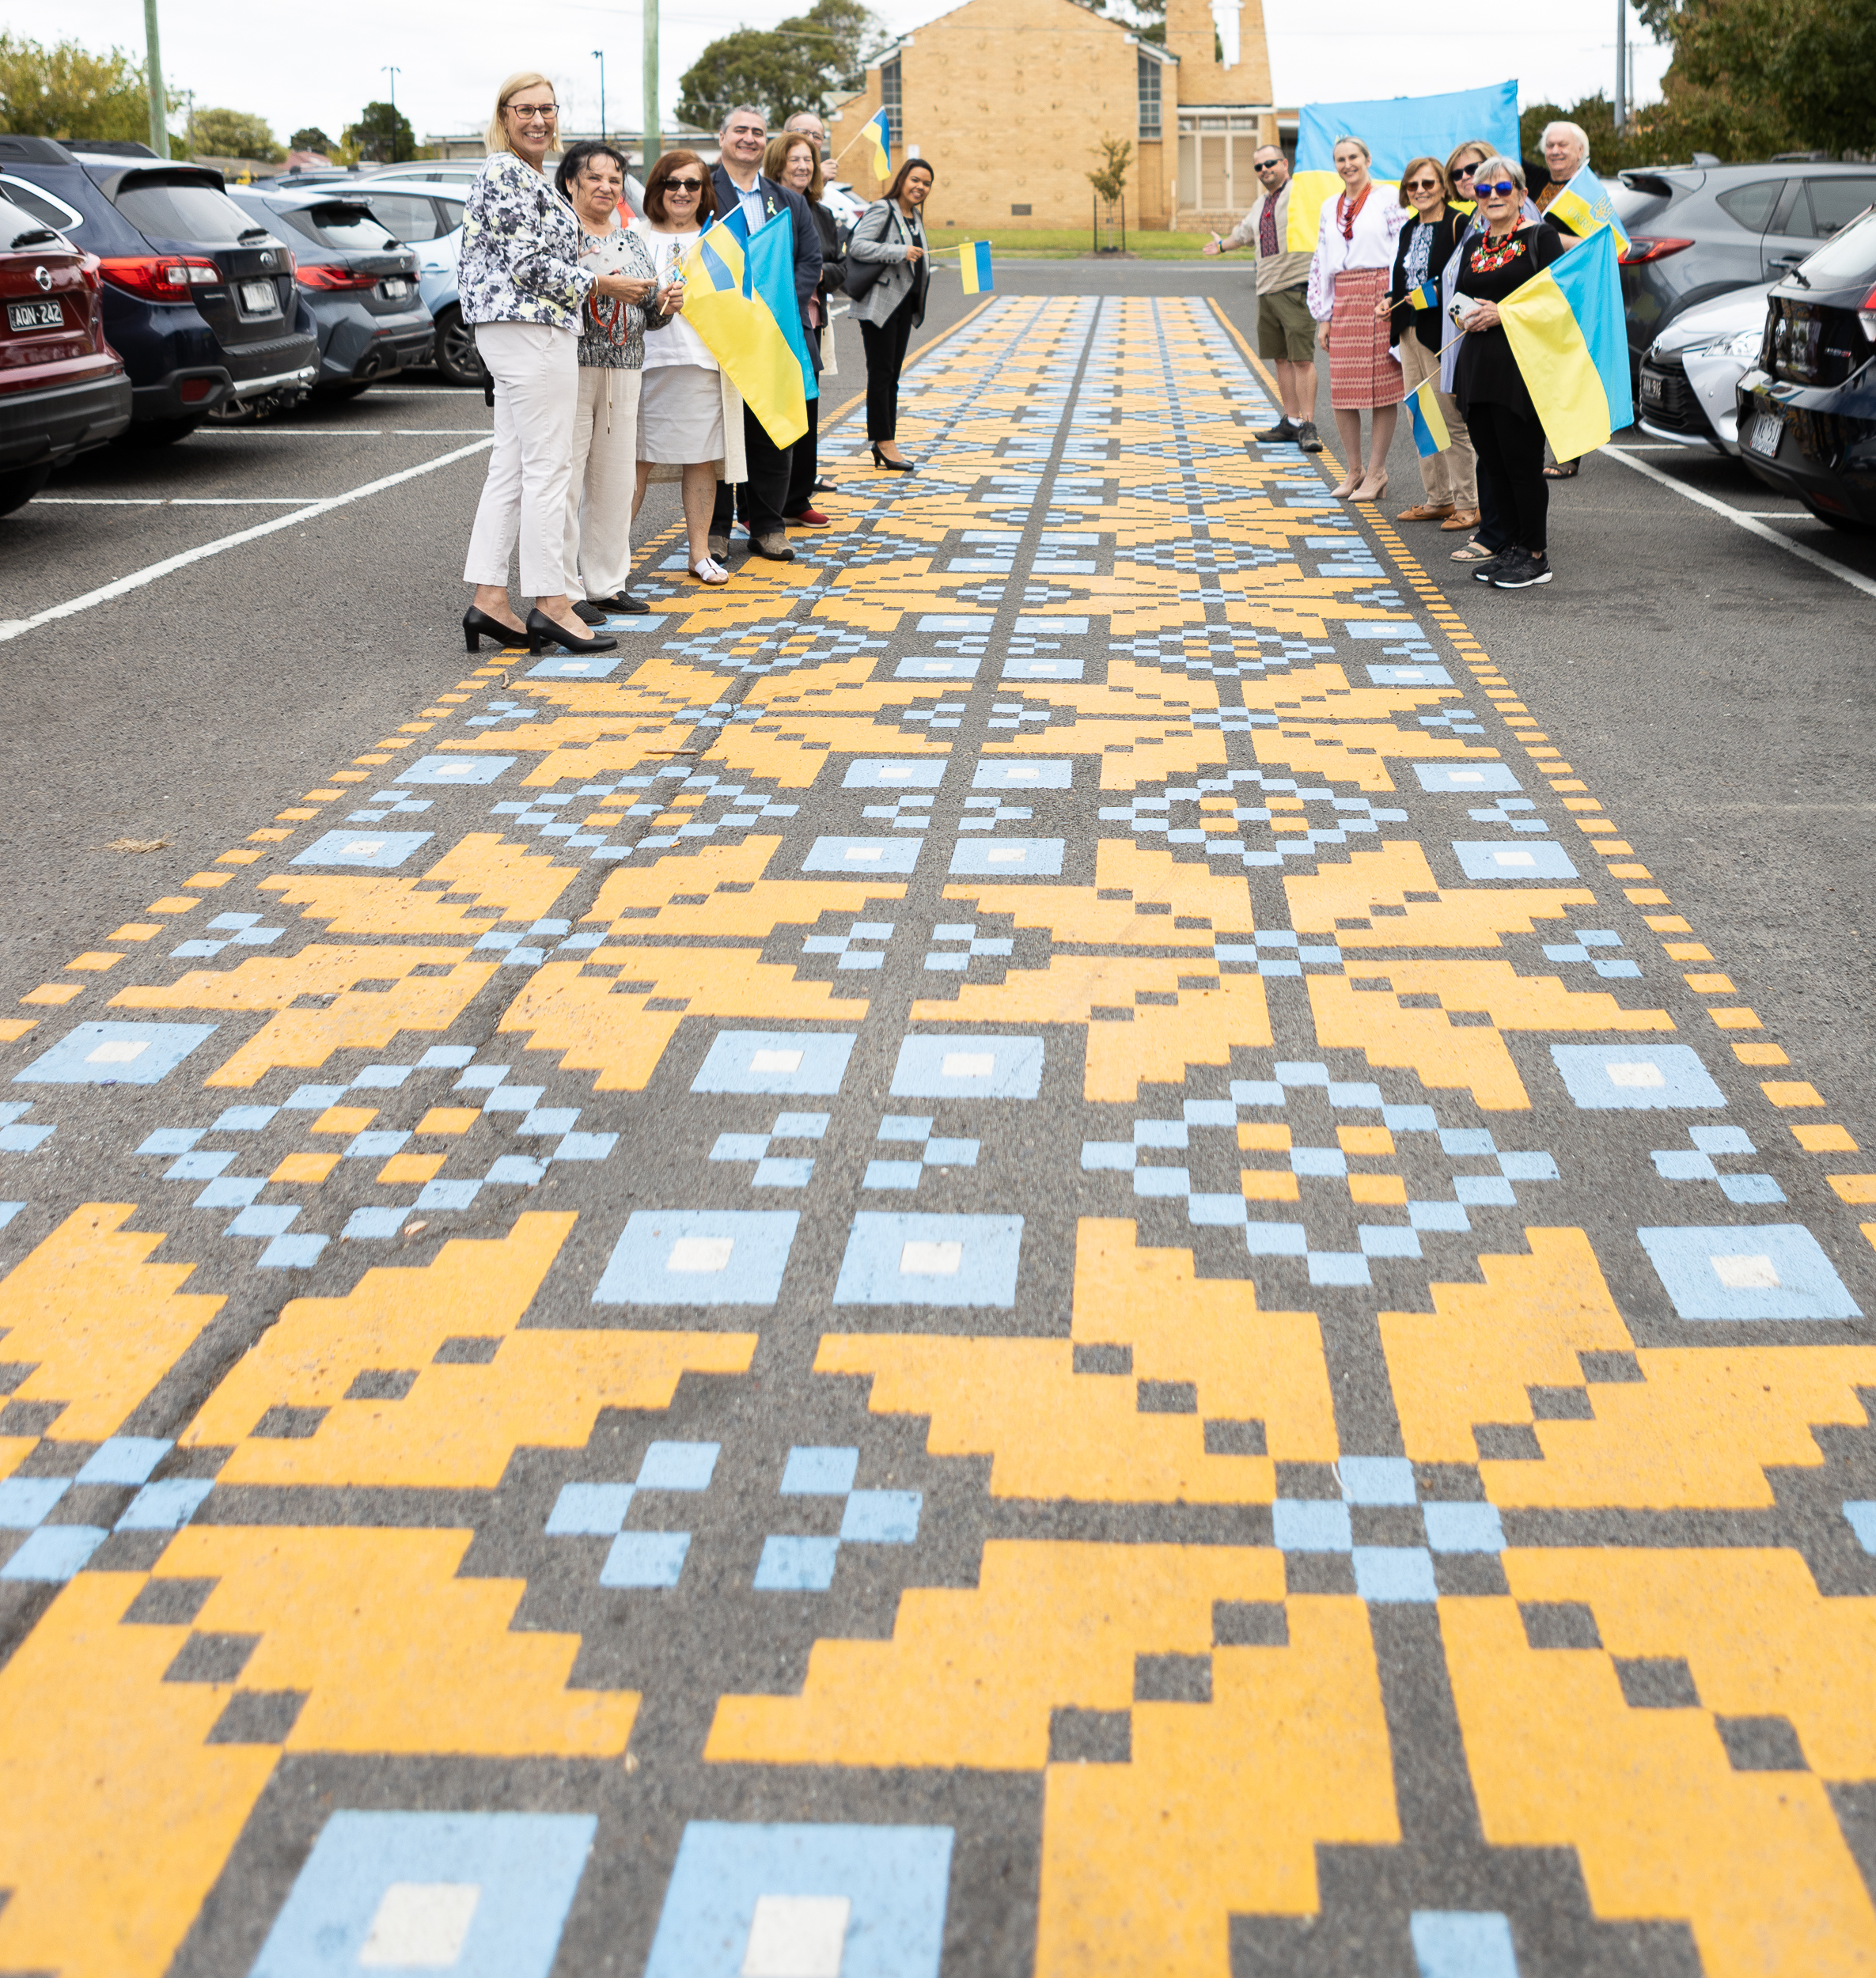 People standing next to Ukrainian mural painted on the road